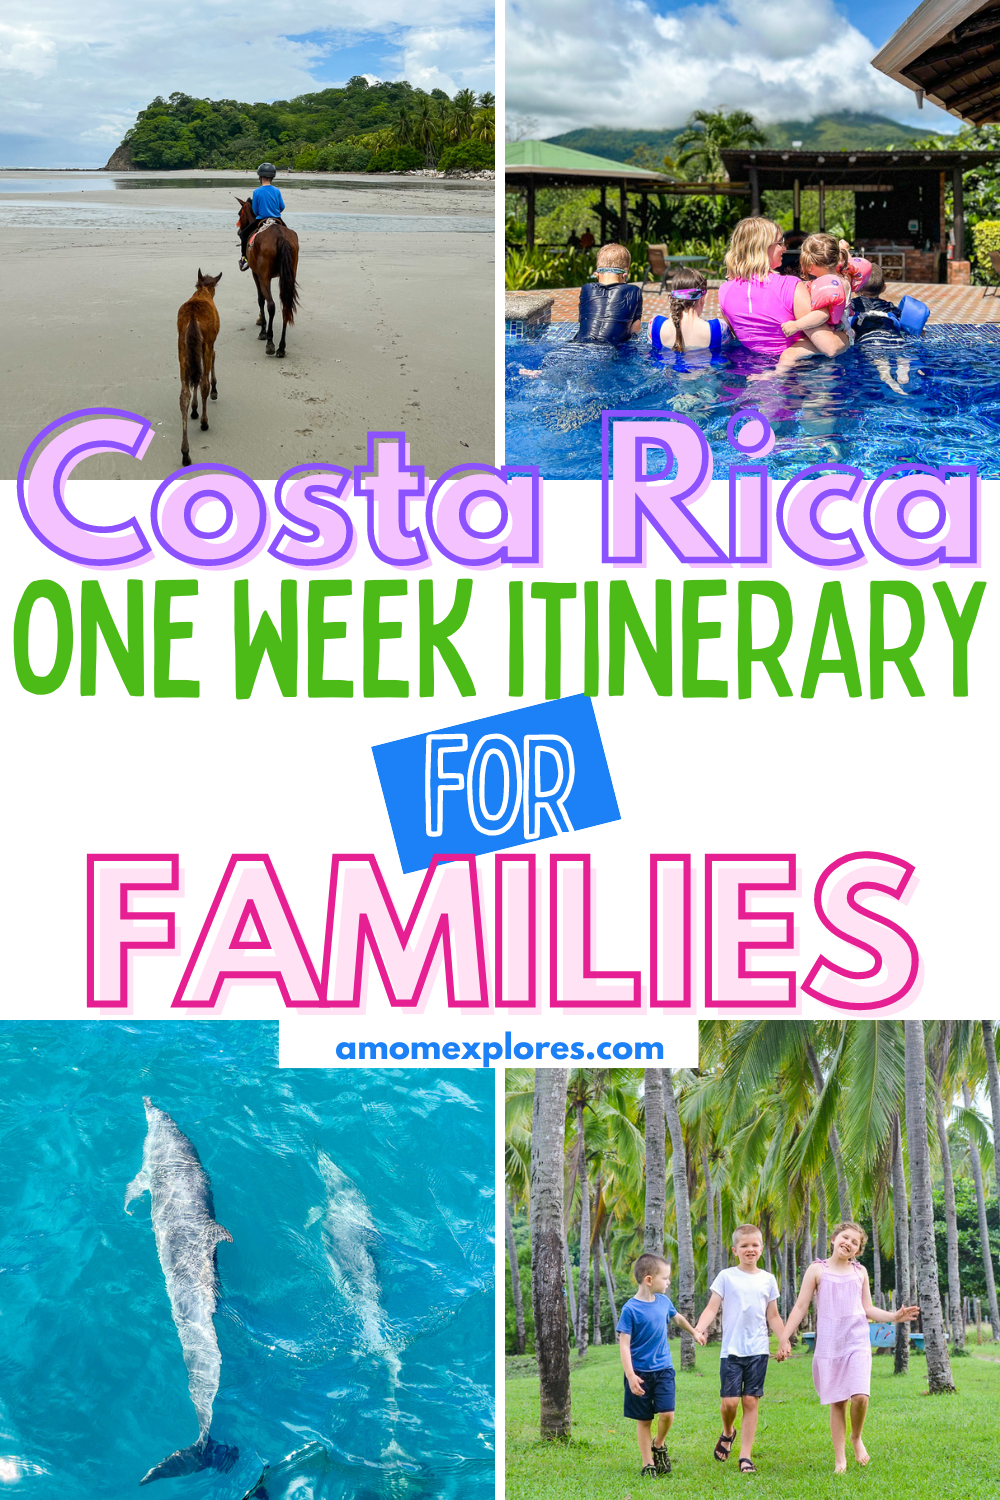 Costa Rica 1 week itinerary for families.png